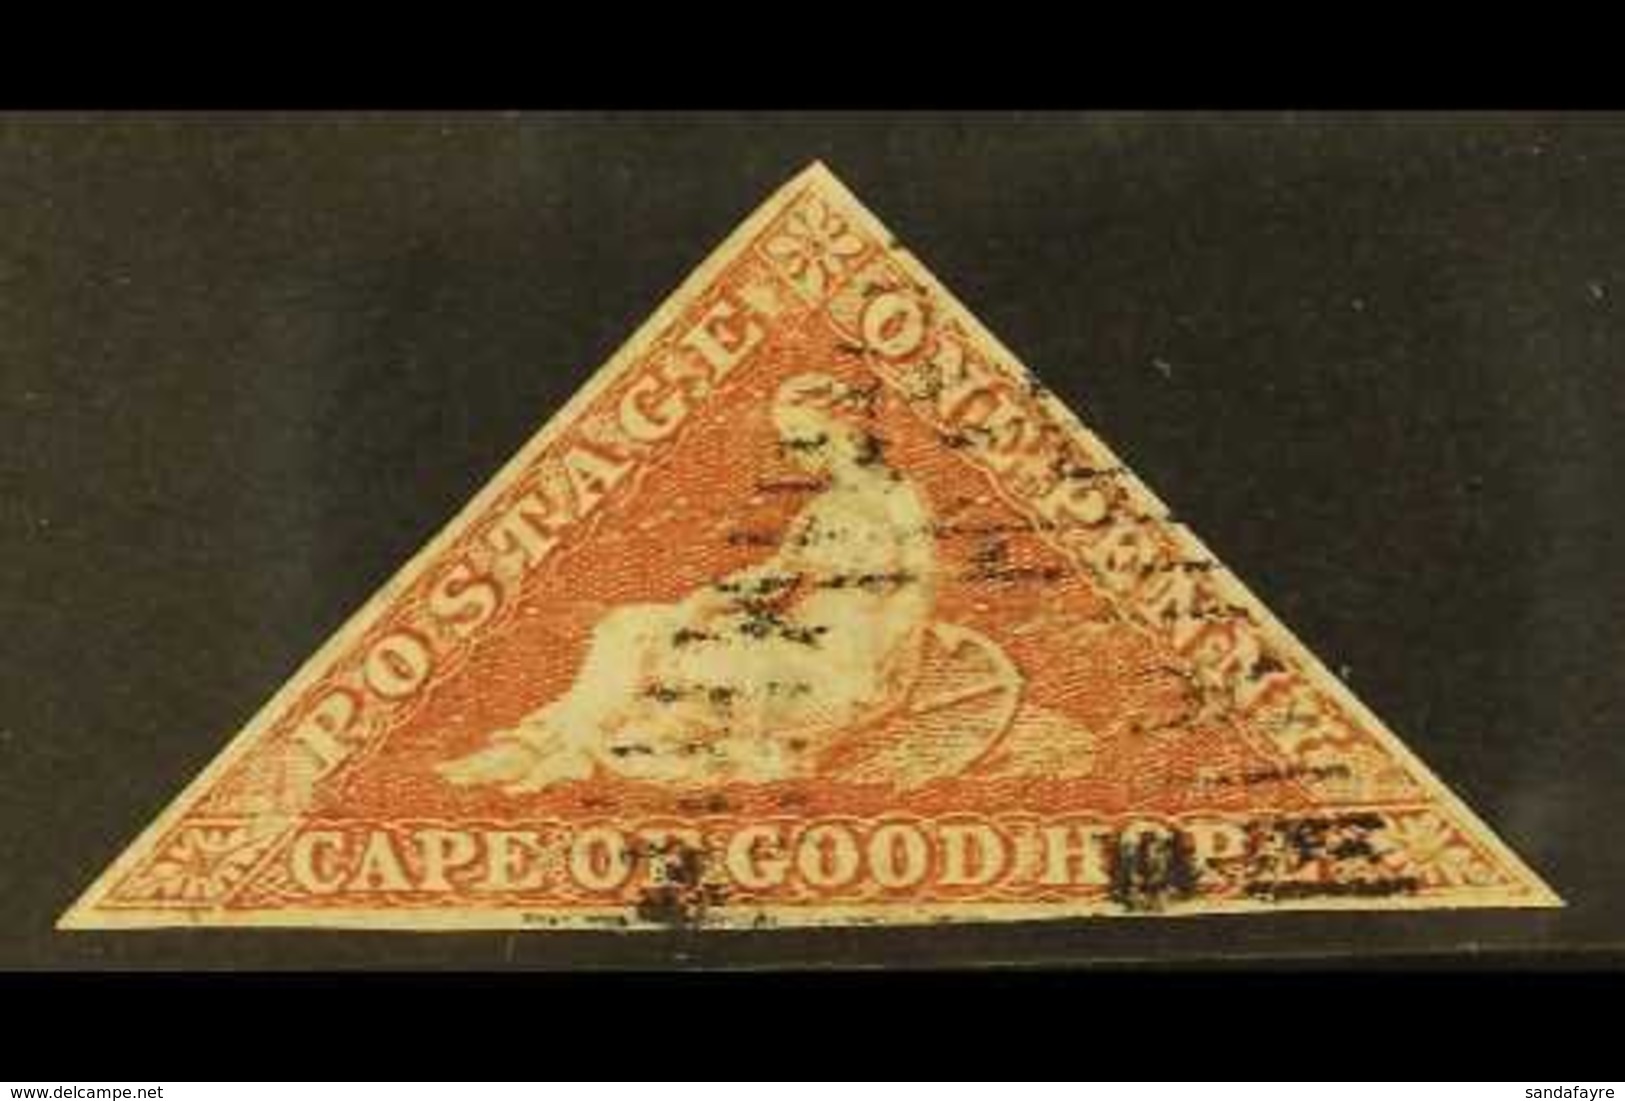 CAPE OF GOOD HOPE 1853 1d Pale Brick Red On Deeply Blued Paper, SG 1, Used With 3 Margins, Cat £450. For More Images, Pl - Non Classés